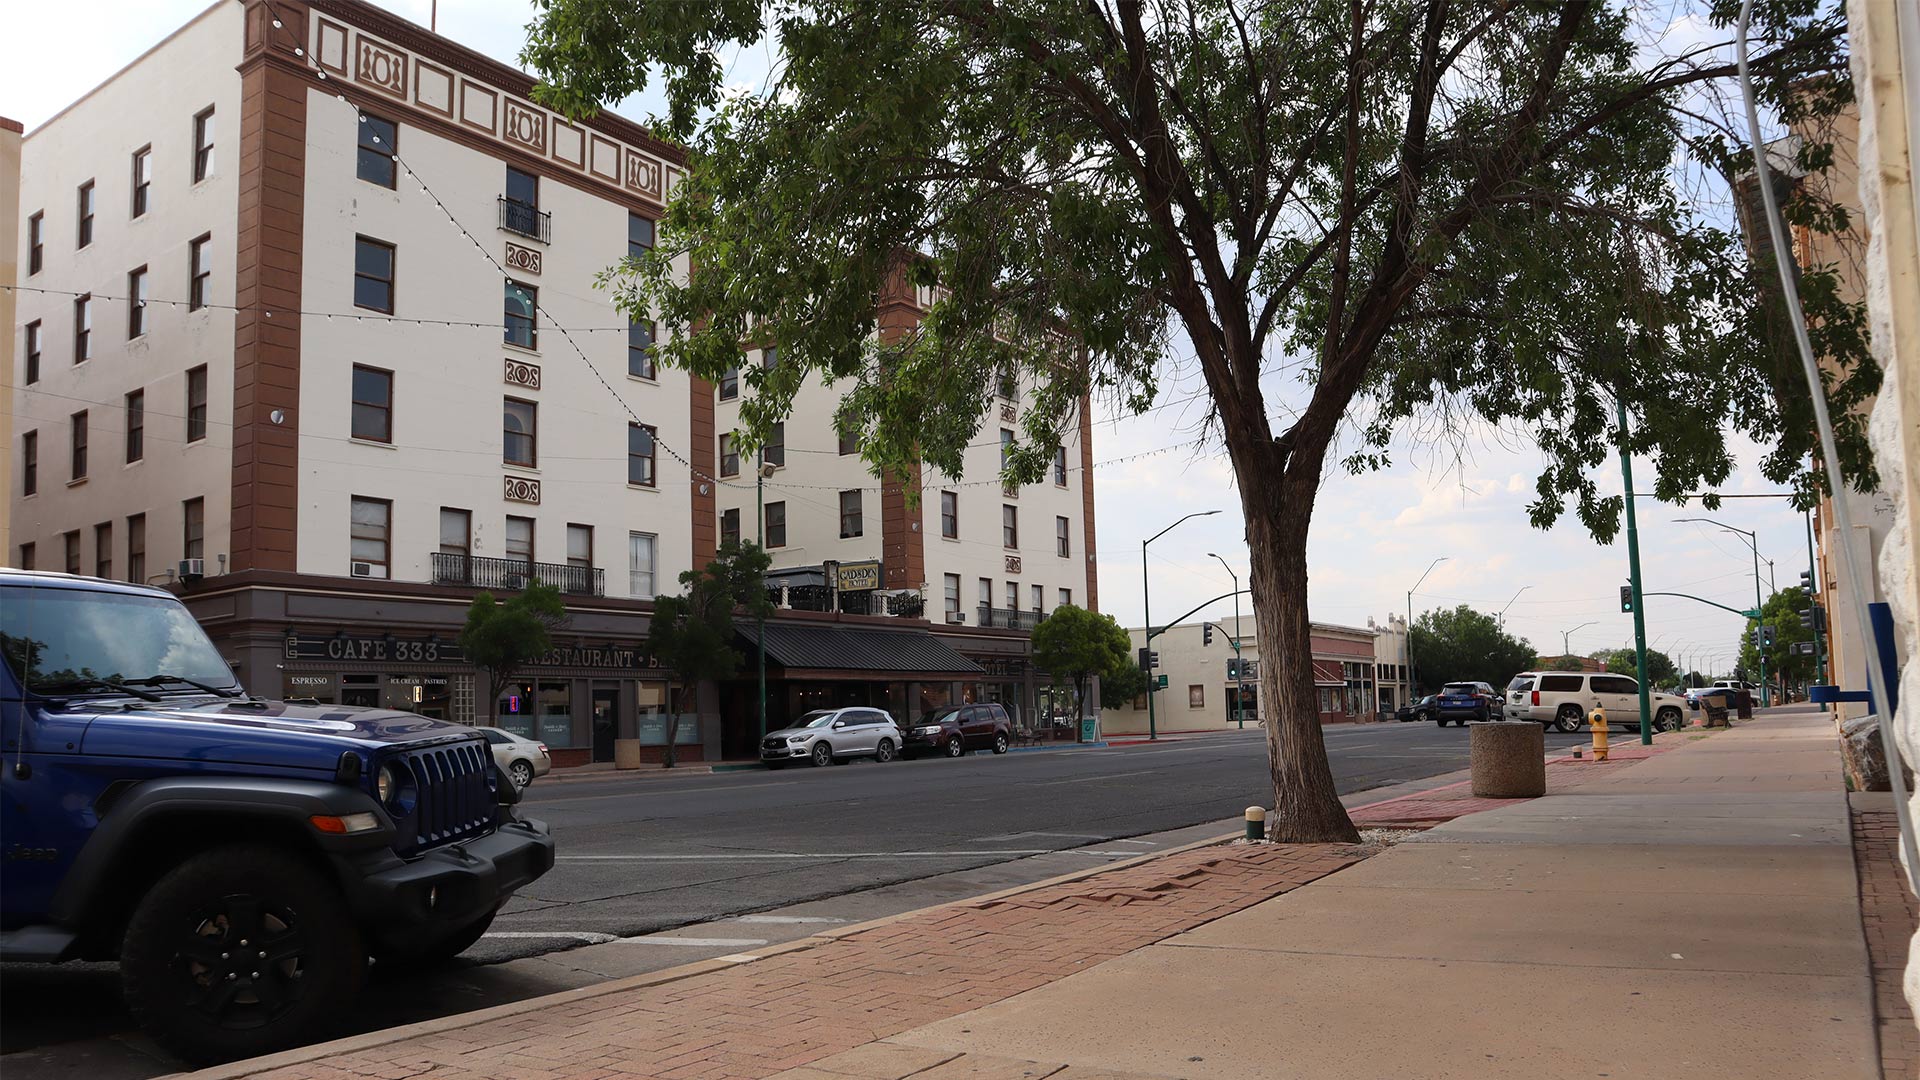 Douglas' current downtown along G Avenue, which includes the historic Gadsden Hotel. July 10, 2023.